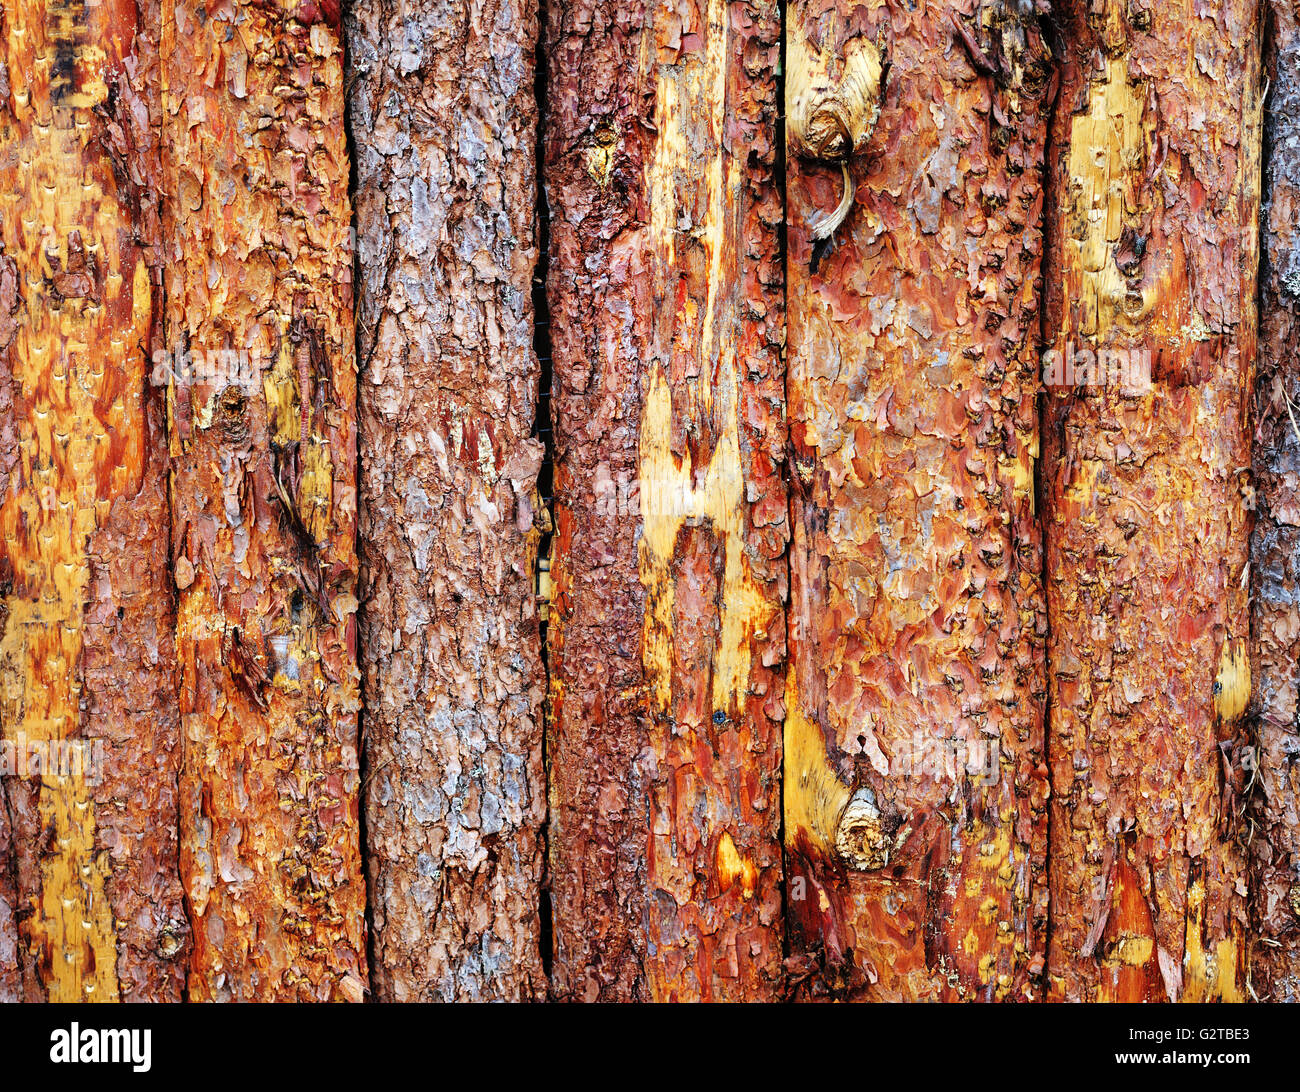 Pine wood fence as a background Stock Photo